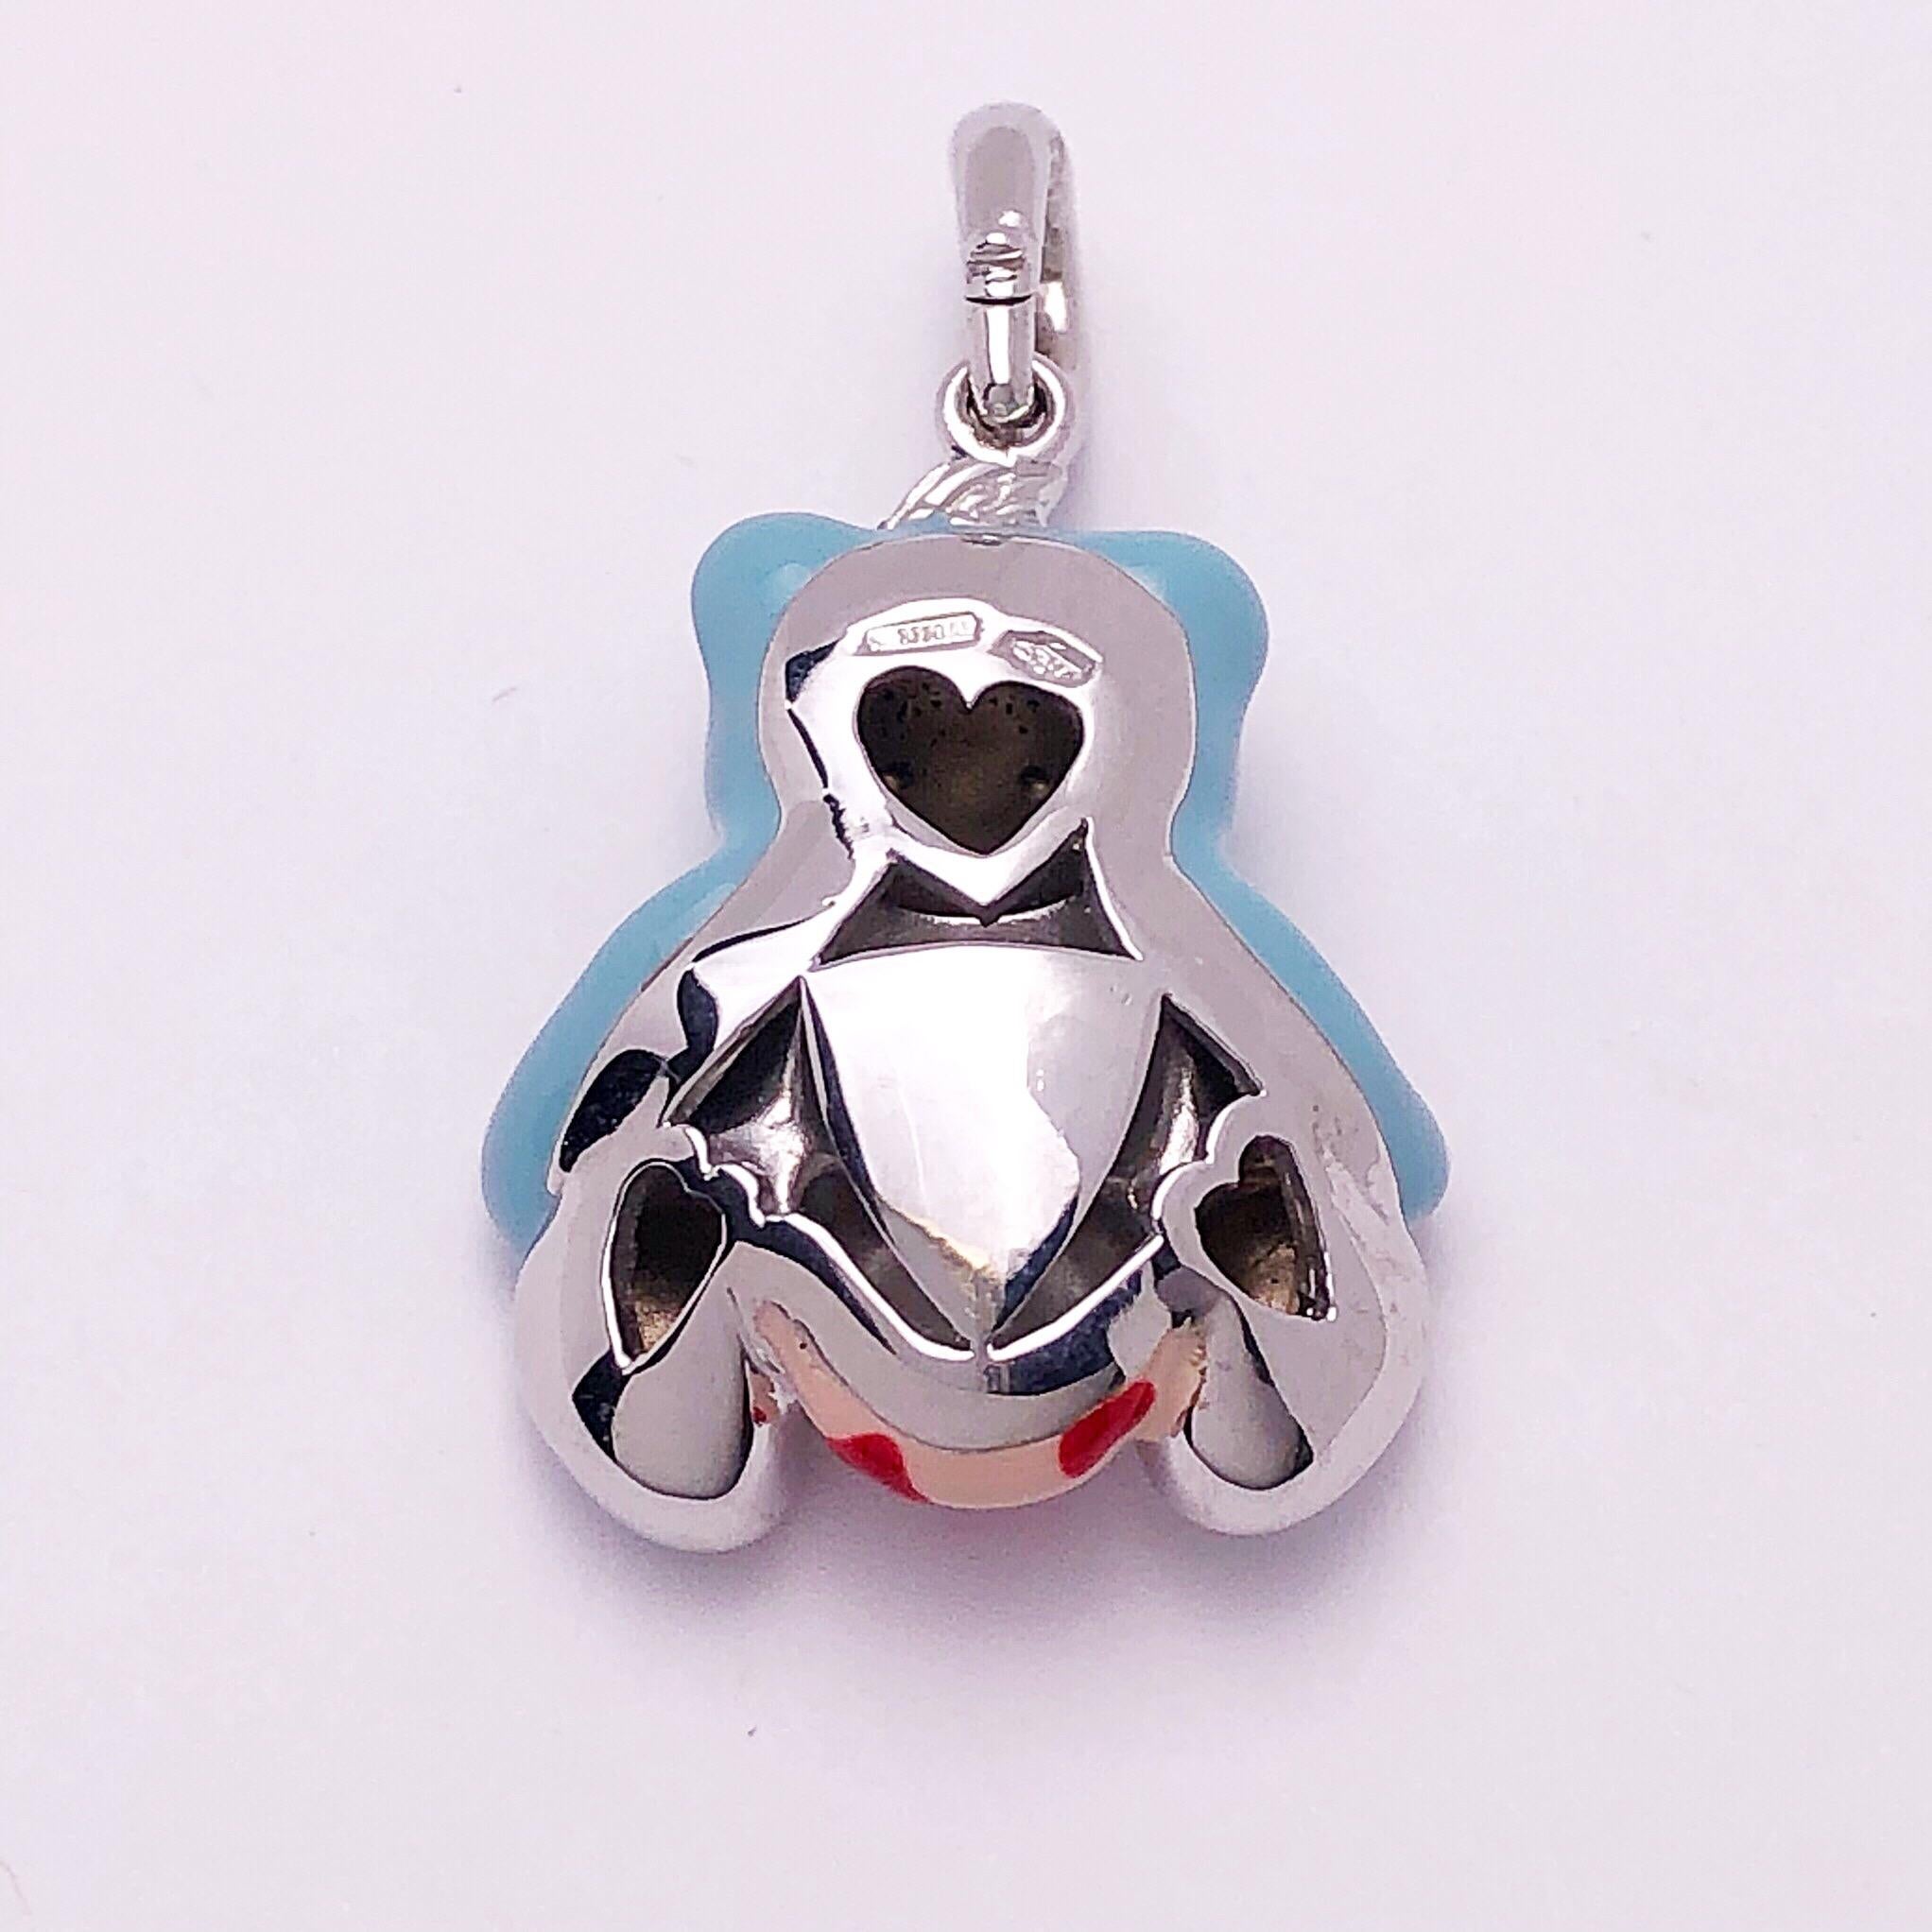 Just the cutest....Teddy bear charm made exclusively for Cellini by Ambrosi of Italy.

This 18 karat white gold teddy bear charm is crafted with light blue enamel for the body. The outfit is light pink with small red hearts. He has blue sapphire